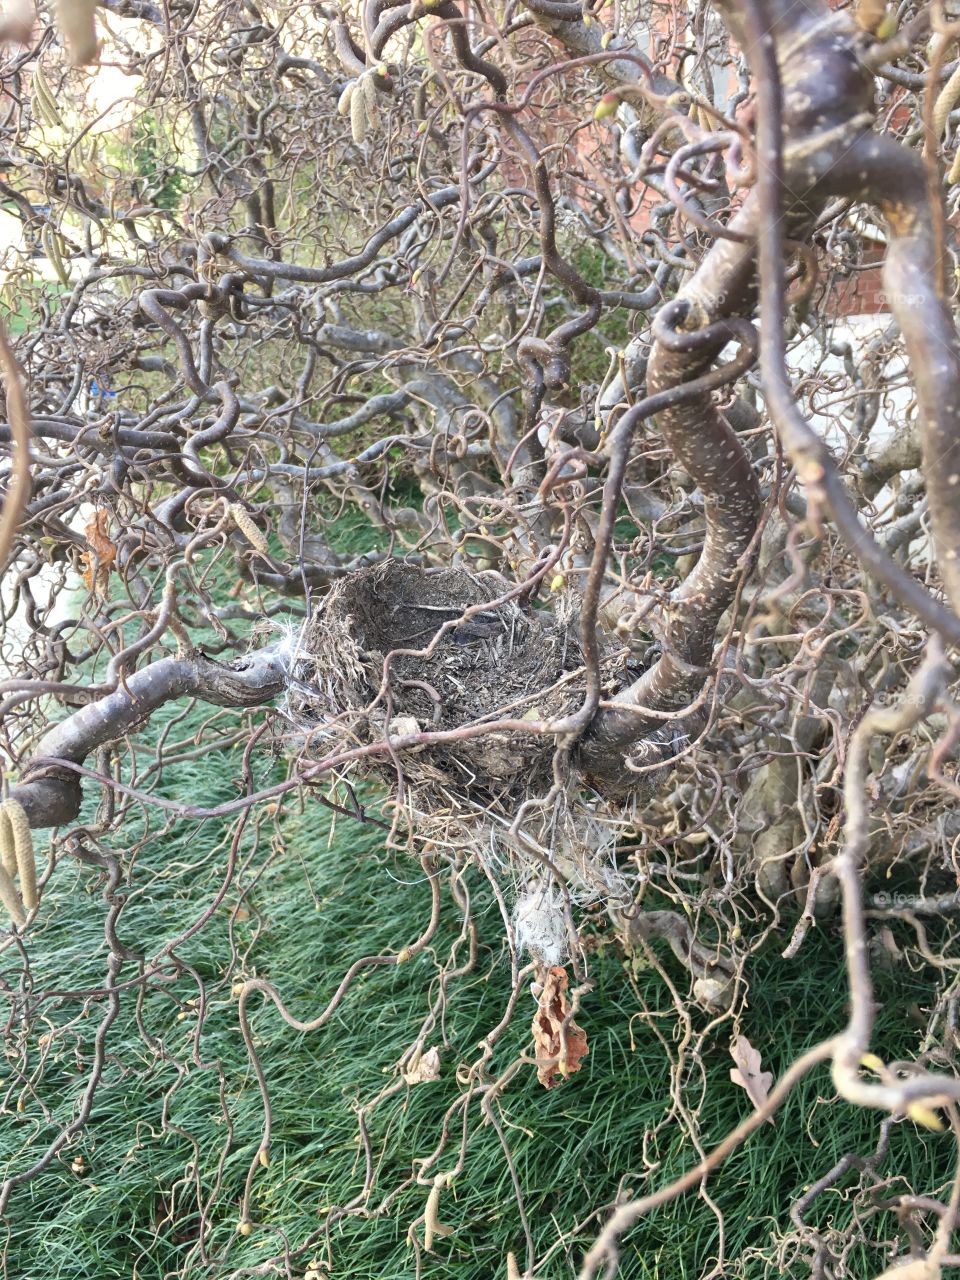 Twisted branches, birds nest, and grass